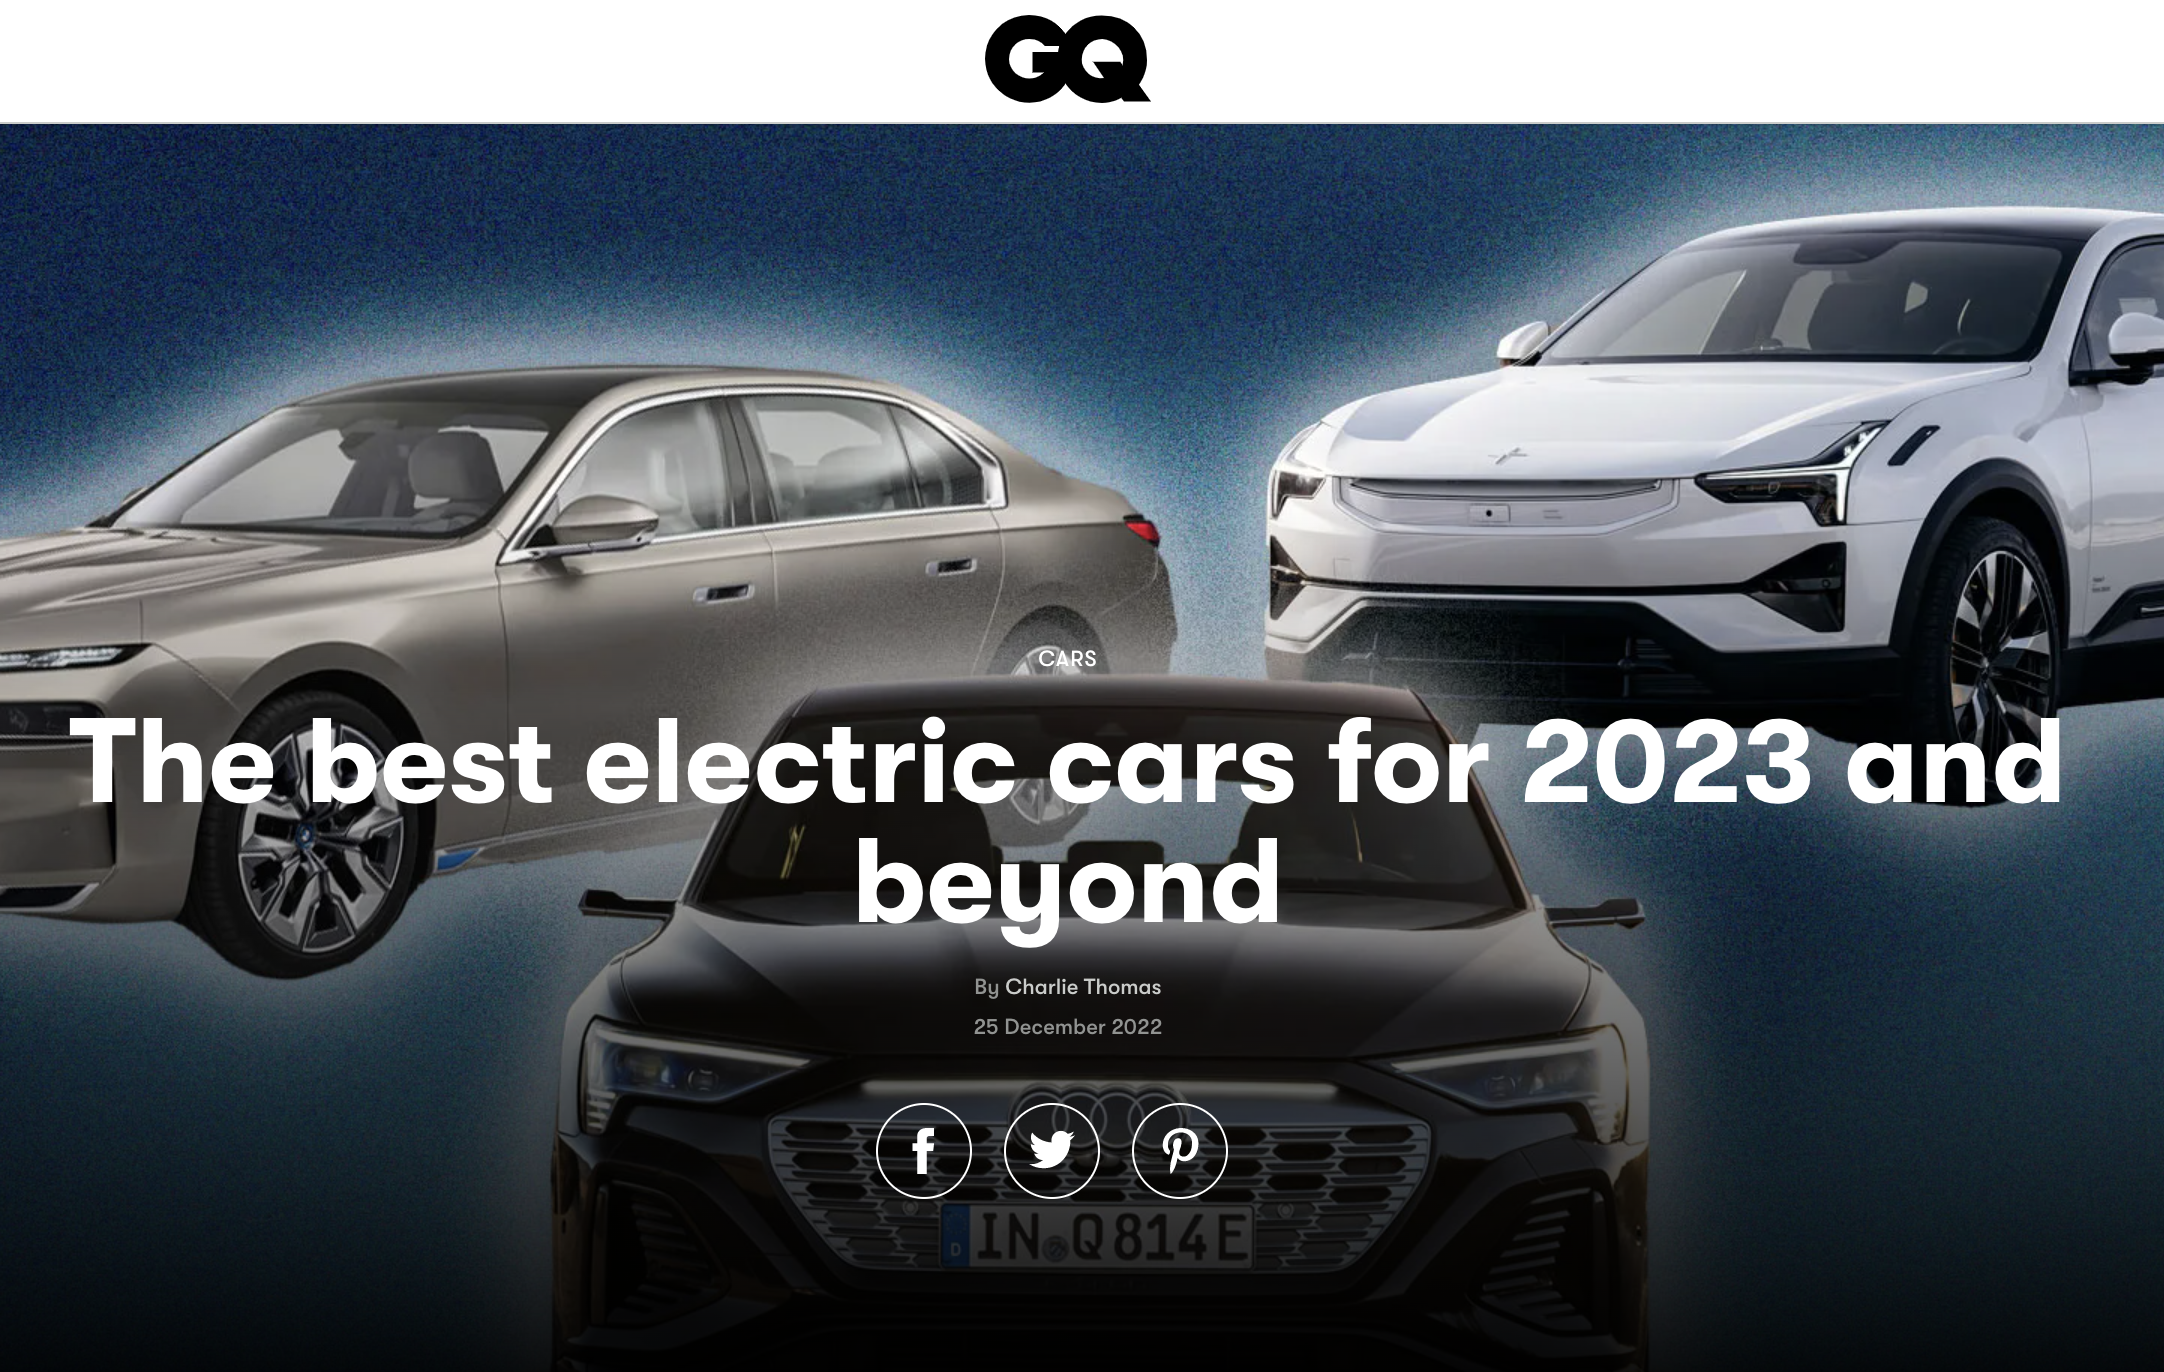 GQ - Best electric cars for 2023